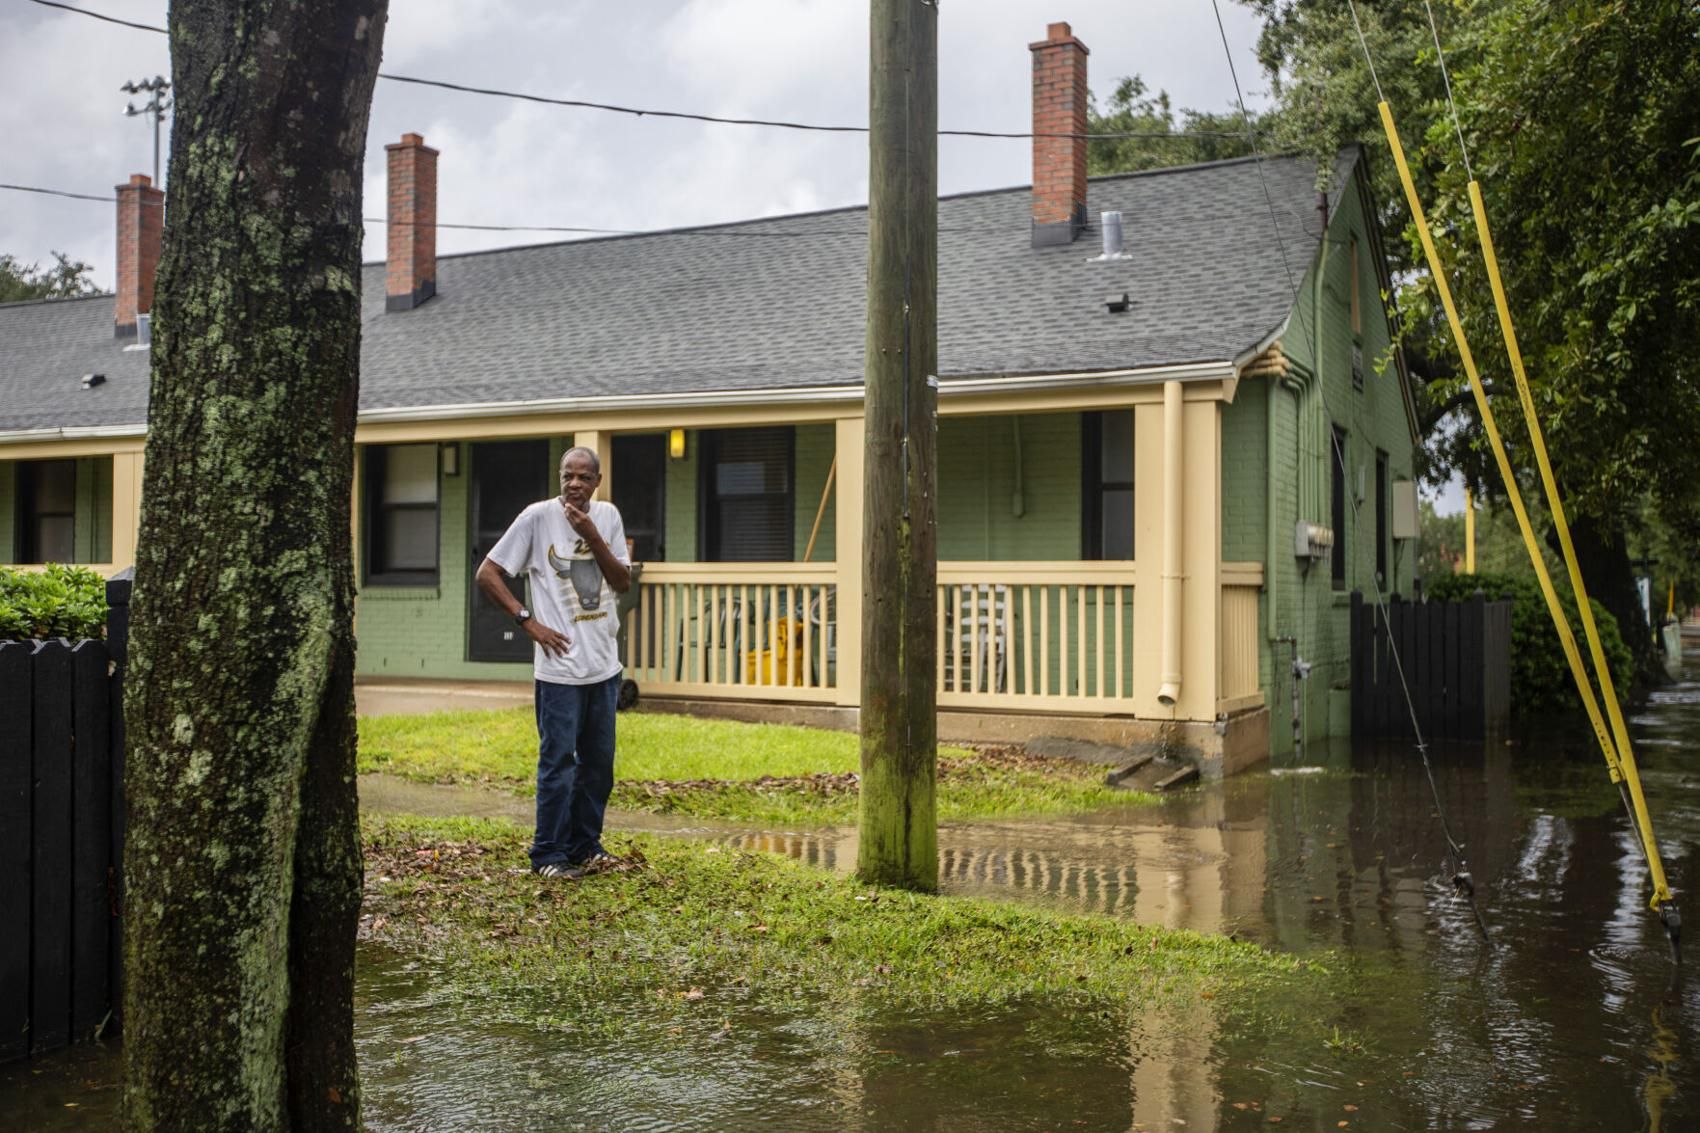 Derwin Wise looks down President Street from Gadsden Green as water floods the road Friday Sept. 25, 2020, in Charleston. Image by Gavin McIntyre/Post and Courier Staff. United States, 2020.